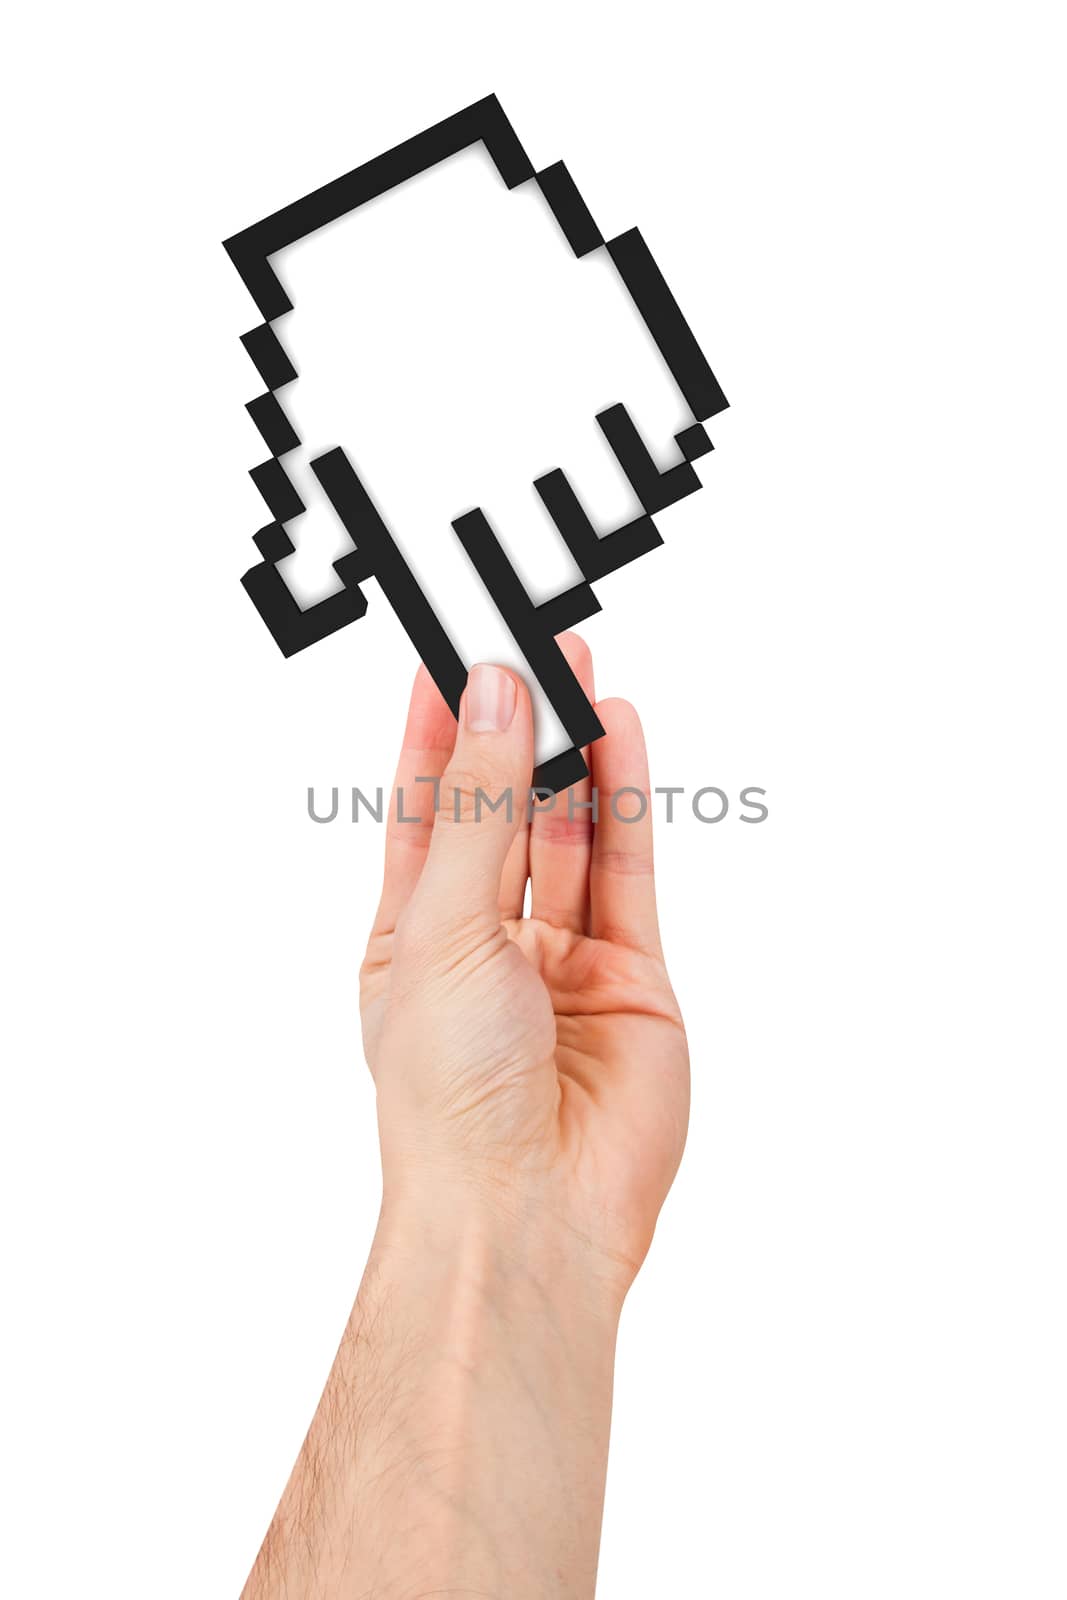 Hand holding computer mouse hand cursor icon, isolated on white background.